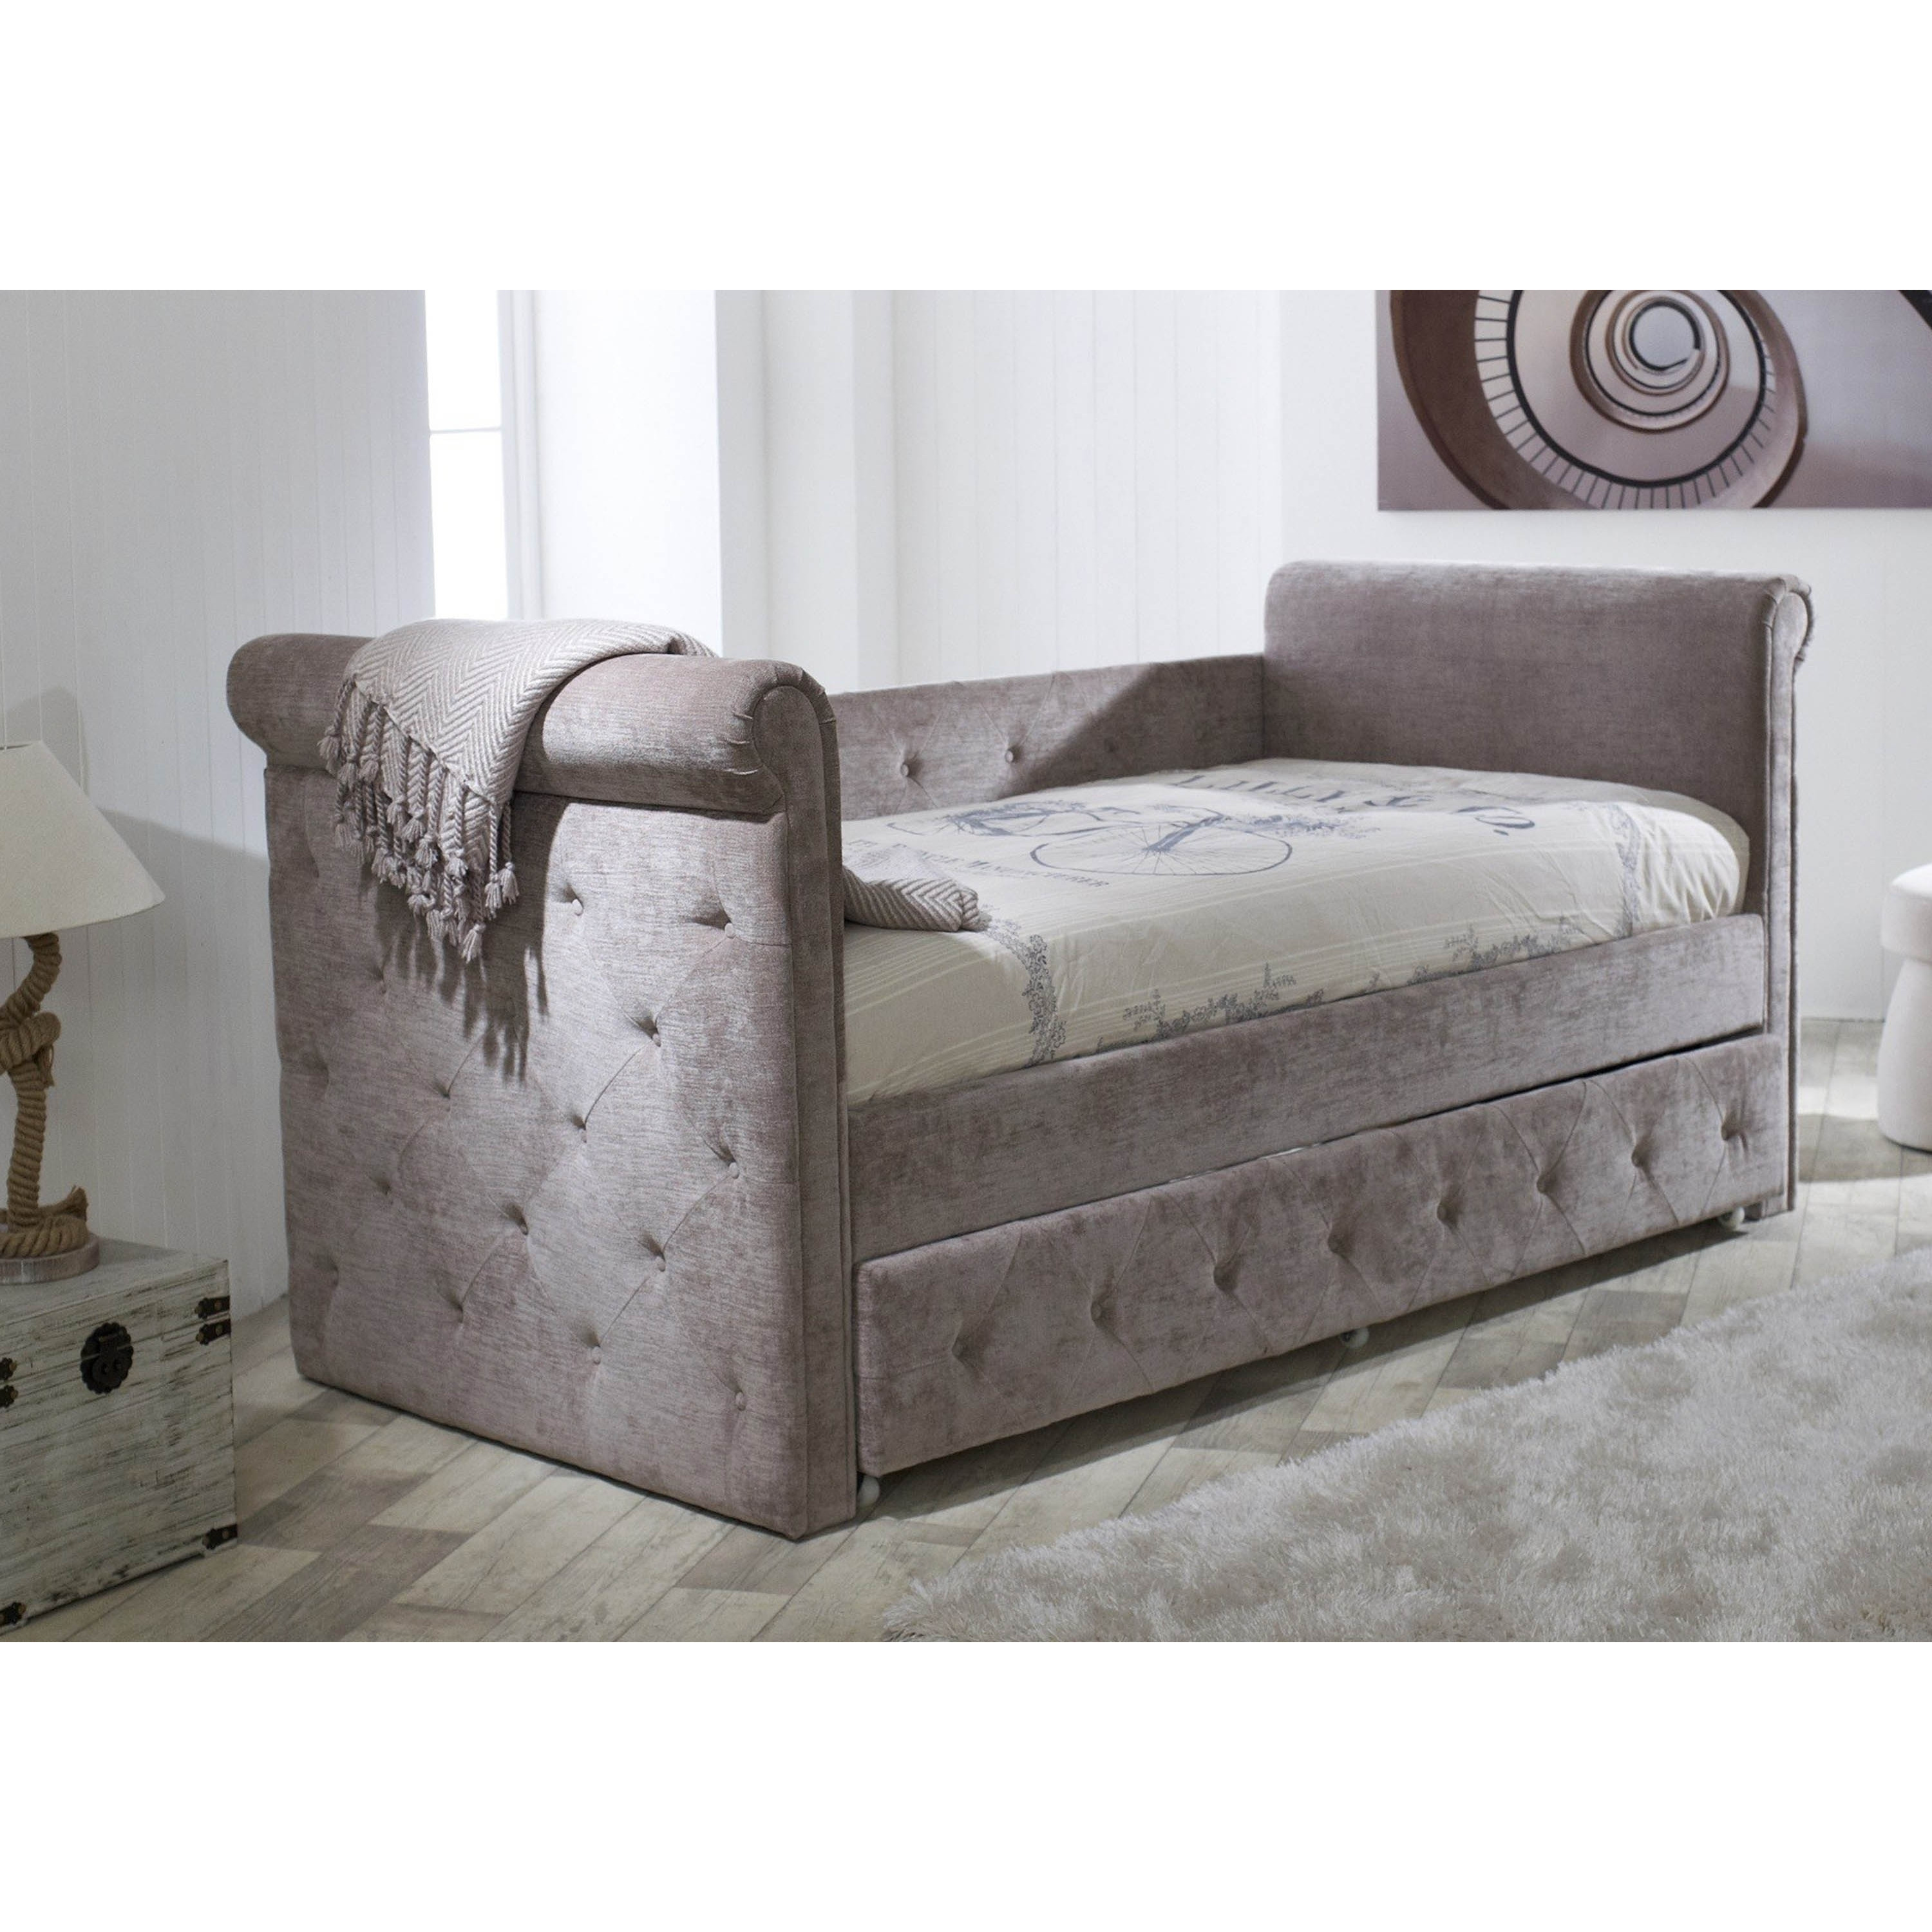 Limelight Zodiac Fabric Daybed With Trundle In Mink - image 1